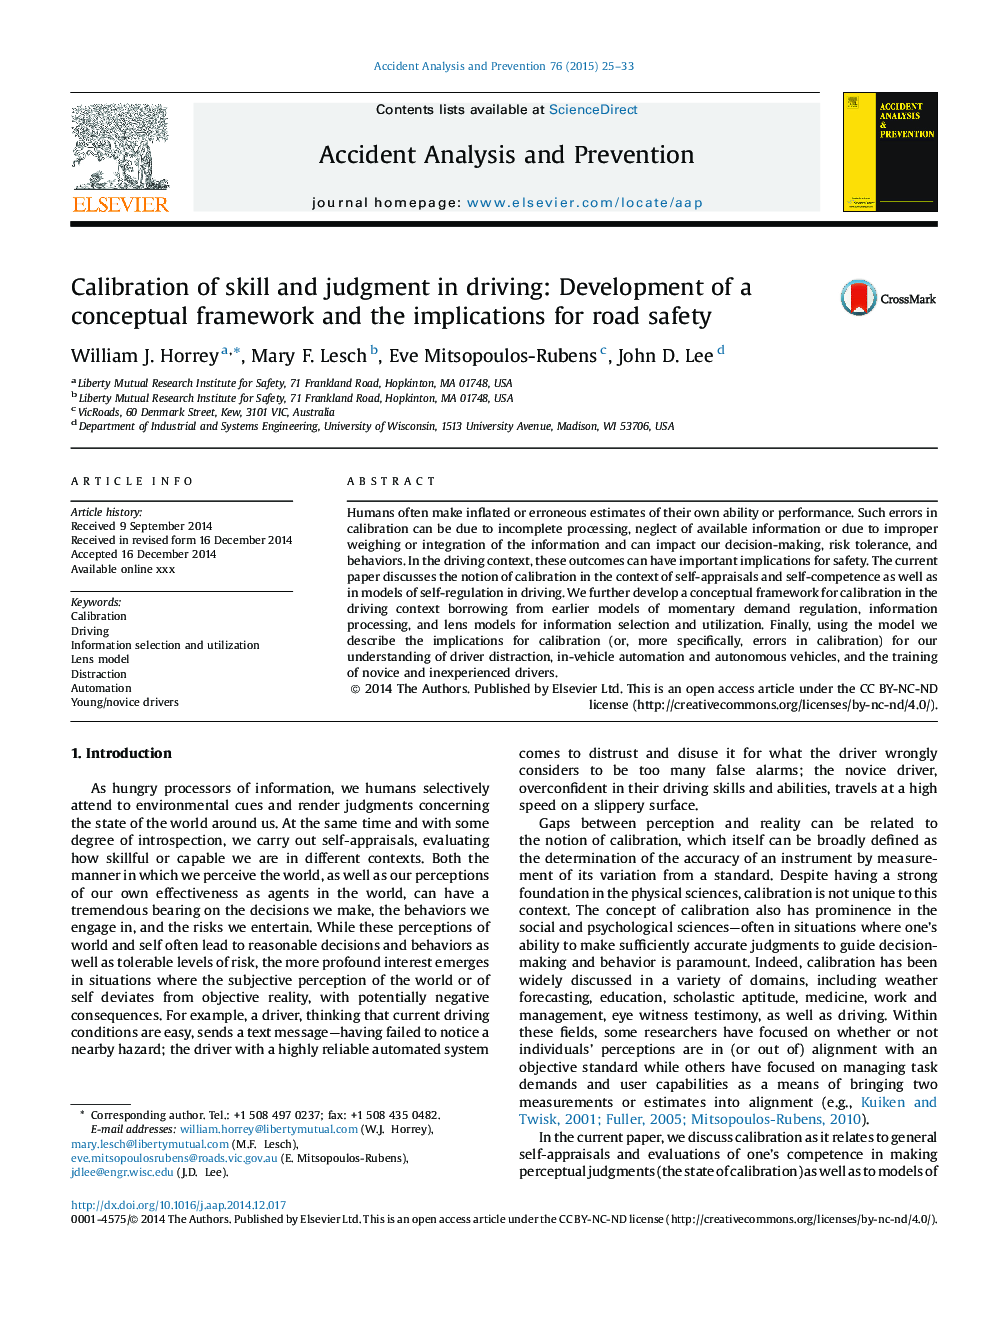 Calibration of skill and judgment in driving: Development of a conceptual framework and the implications for road safety